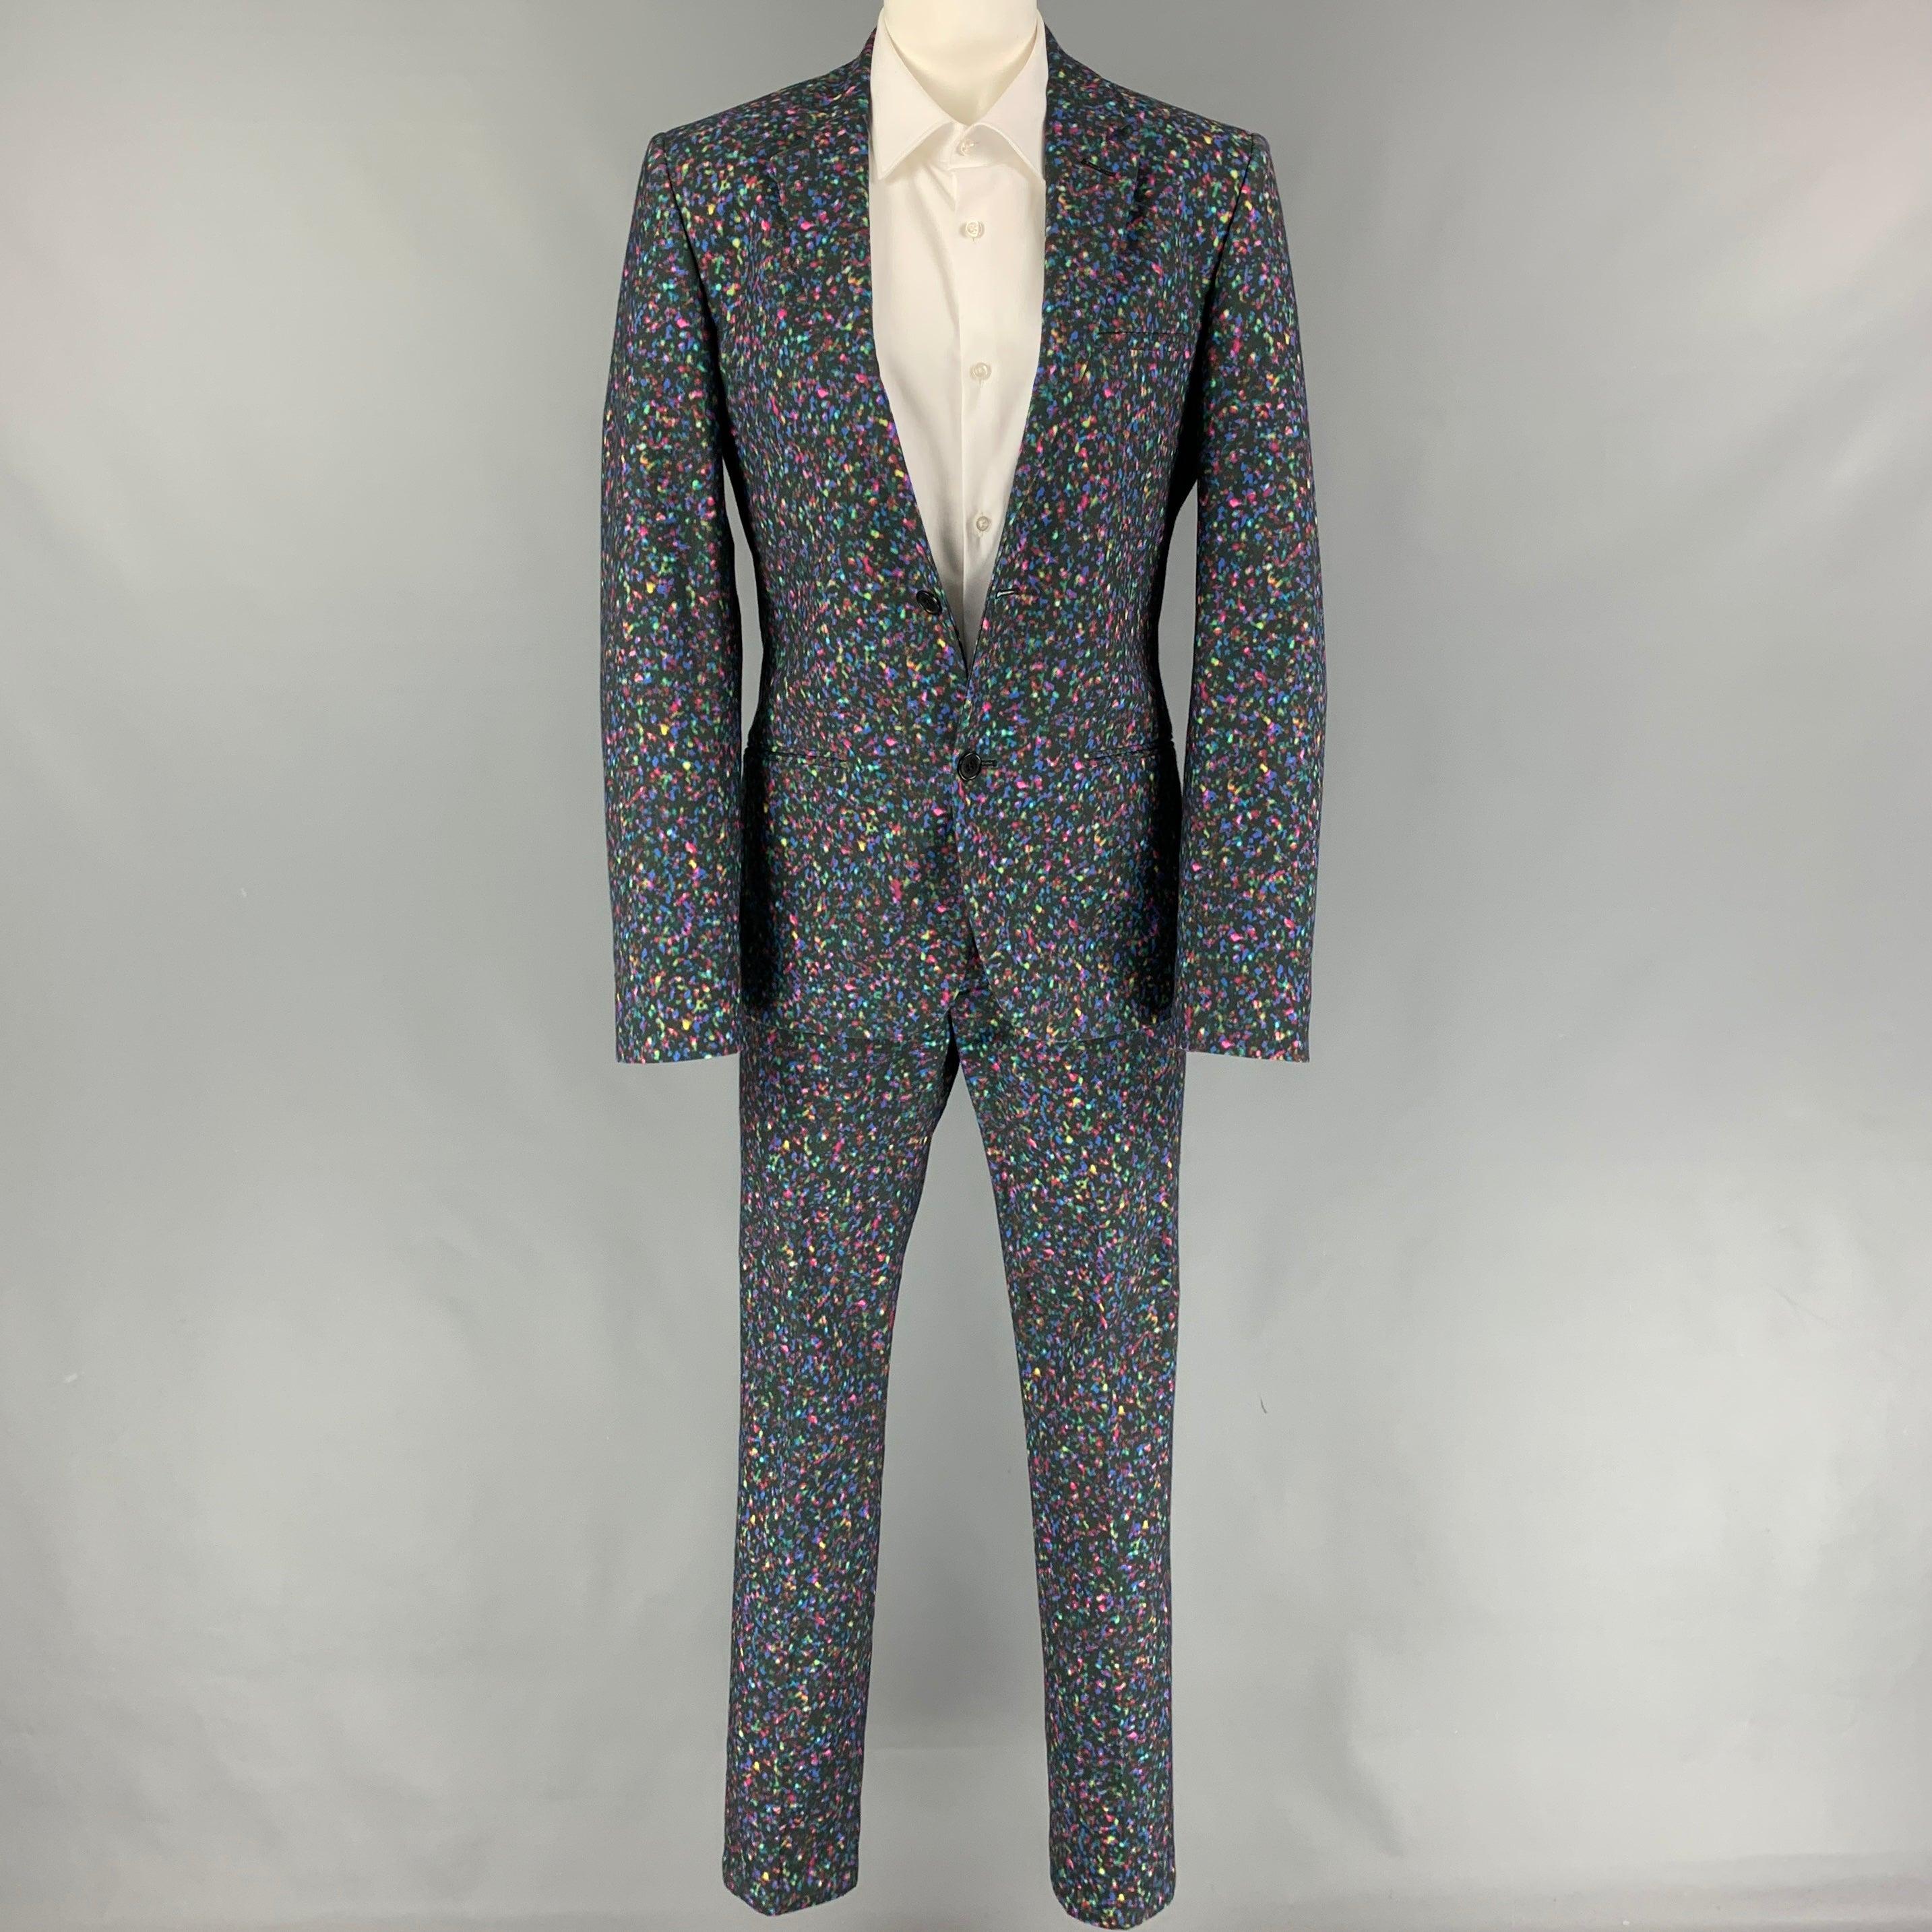 CALVIN KLEIN COLLECTION
suit comes in a multi-color print cotton and includes a single breasted, double button sport coat with a notch lapel and matching flat front trousers. Very Good Pre-Owned Condition. 

Marked:   44/34 

Measurements: 
 